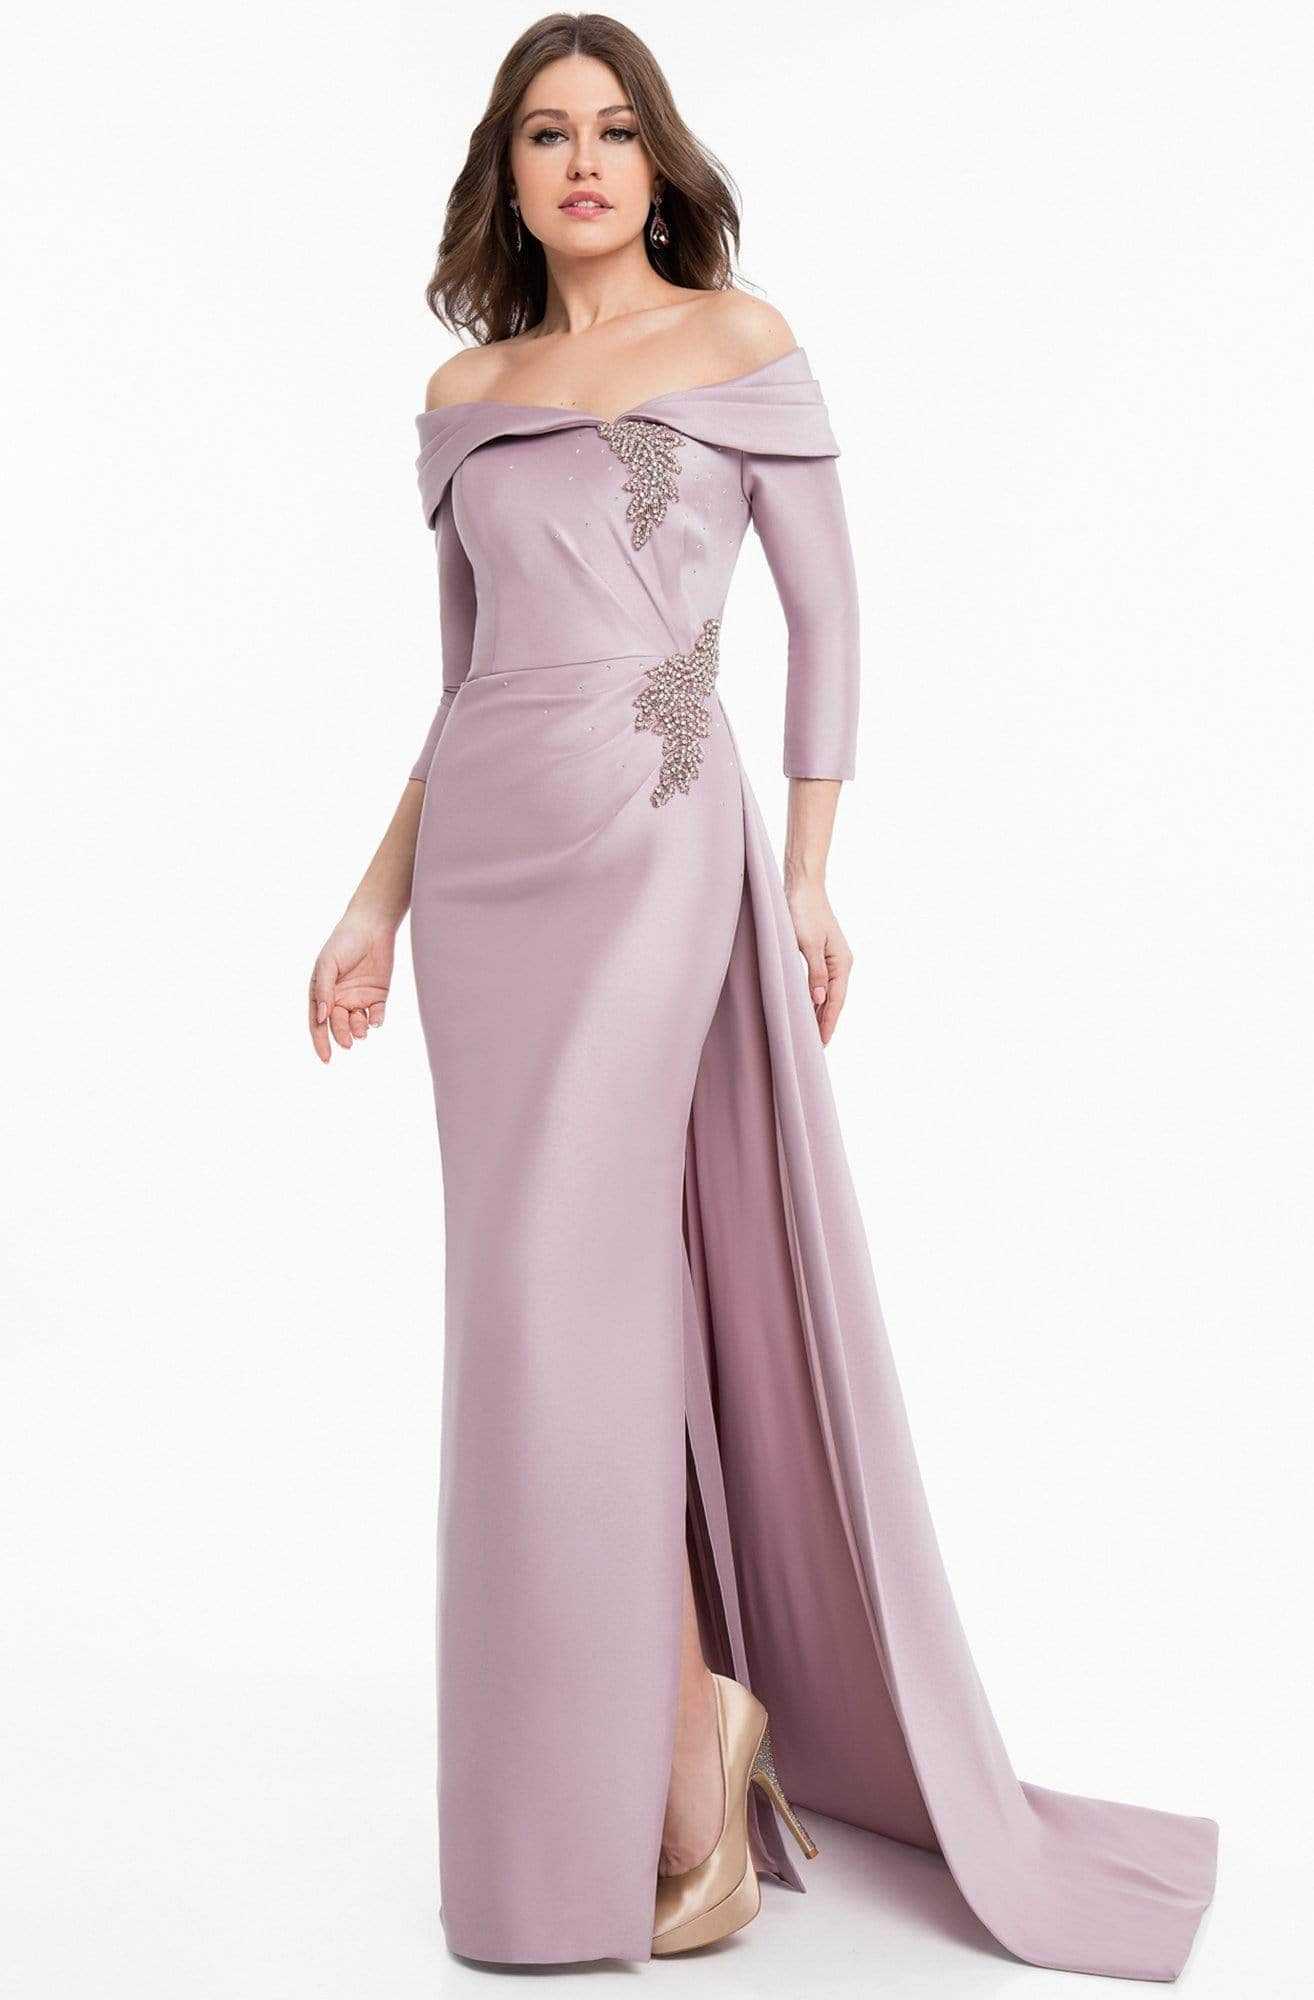 Terani Couture, Terani Couture 1821M7550 - Off Shoulder Evening Gown with Sash